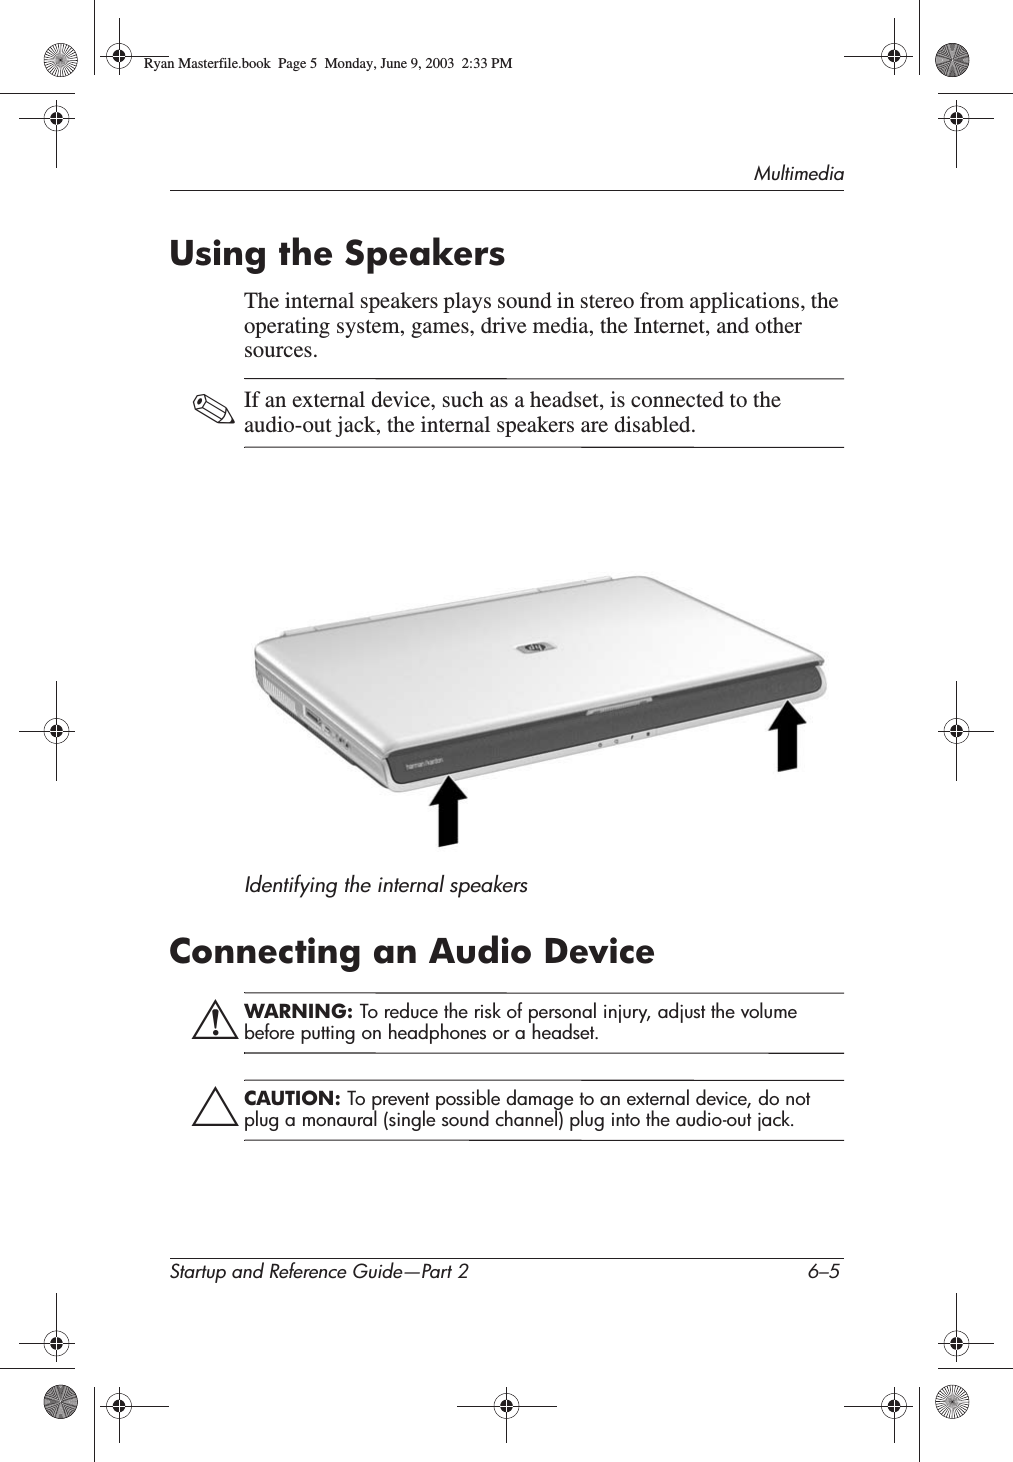 MultimediaStartup and Reference Guide—Part 2 6–5Using the SpeakersThe internal speakers plays sound in stereo from applications, the operating system, games, drive media, the Internet, and other sources.✎If an external device, such as a headset, is connected to the audio-out jack, the internal speakers are disabled.Identifying the internal speakersConnecting an Audio DeviceÅWARNING: To reduce the risk of personal injury, adjust the volume before putting on headphones or a headset.ÄCAUTION: To prevent possible damage to an external device, do not plug a monaural (single sound channel) plug into the audio-out jack.Ryan Masterfile.book  Page 5  Monday, June 9, 2003  2:33 PM